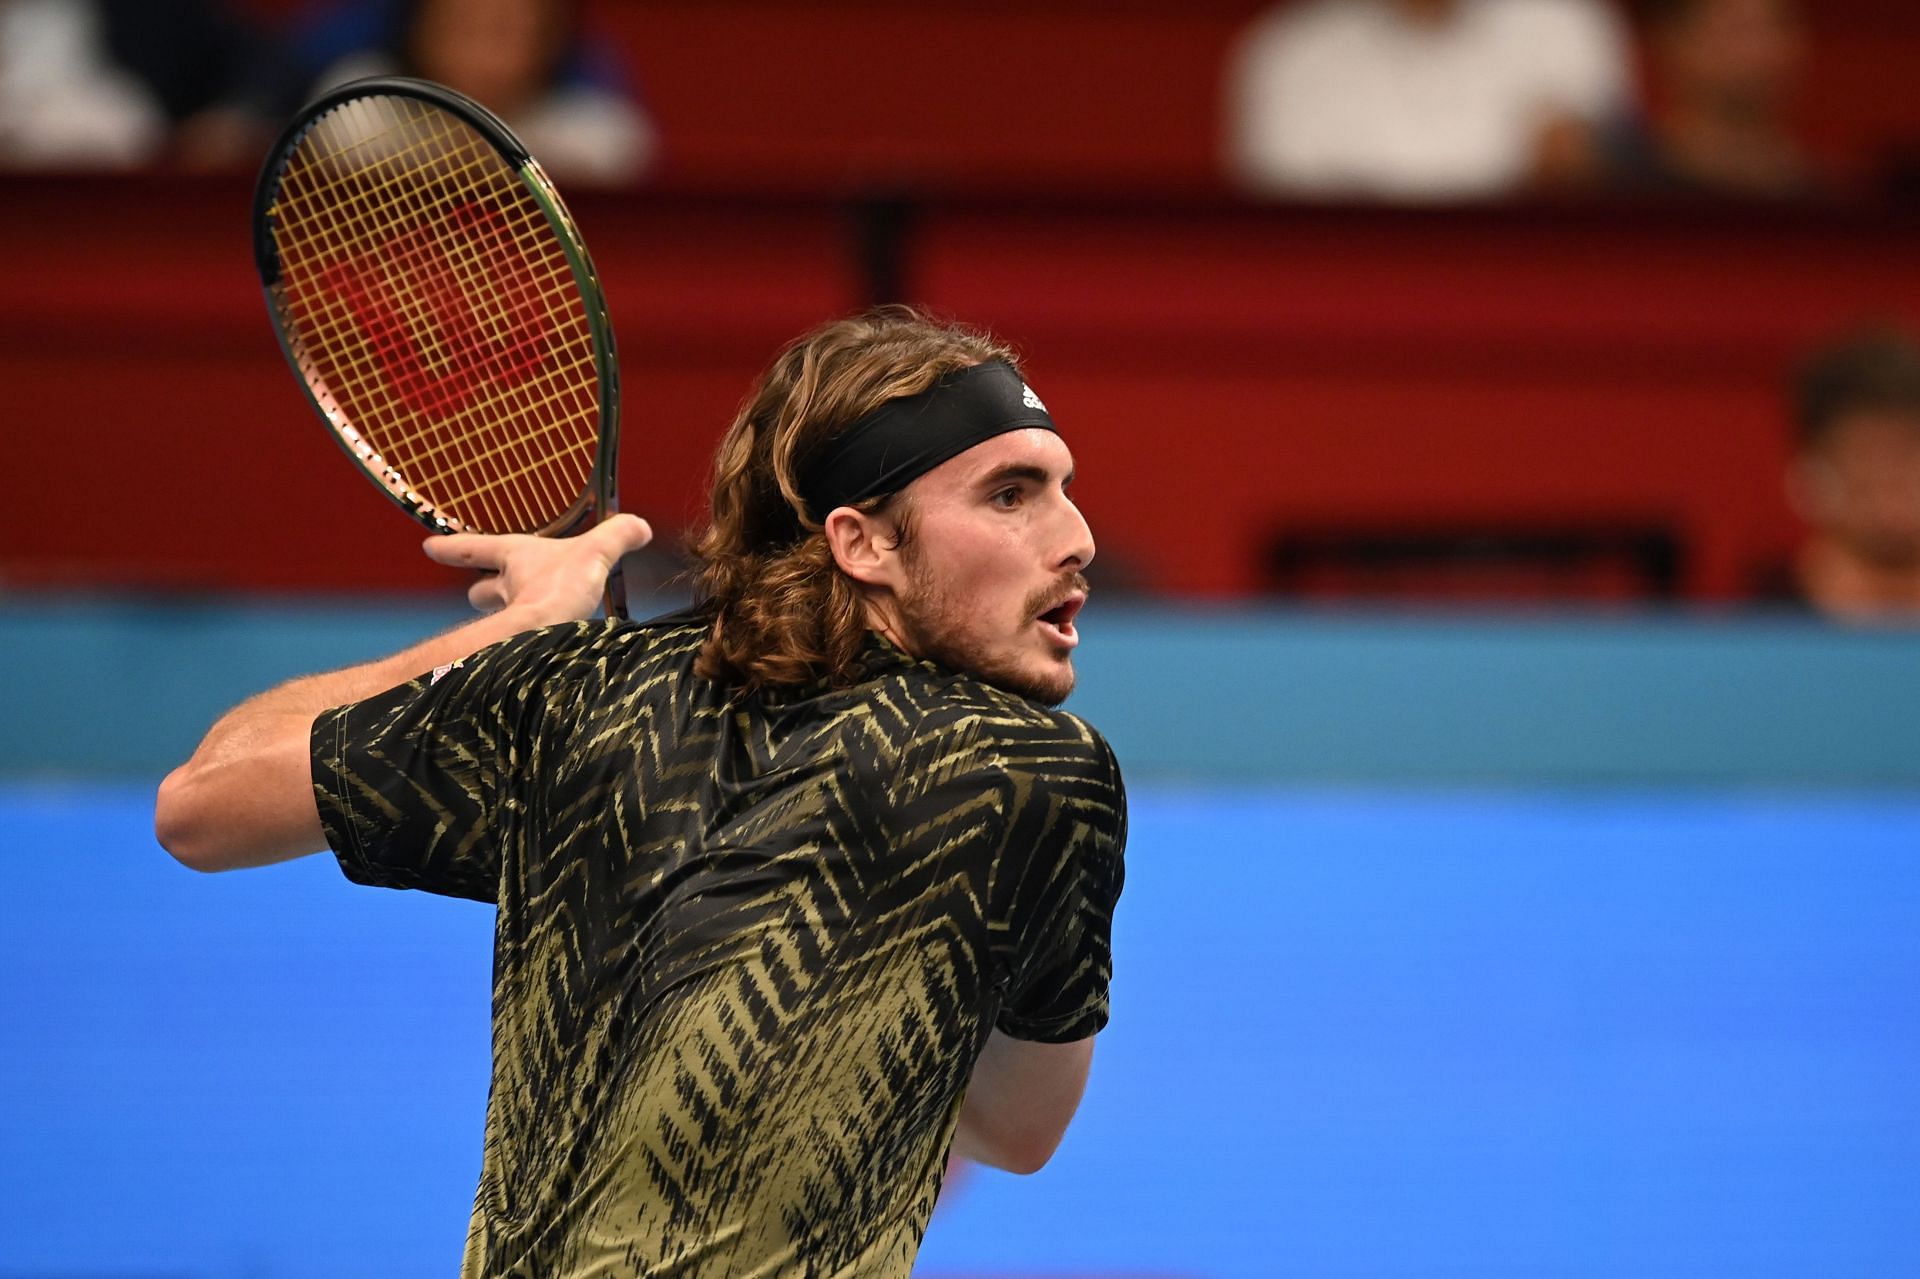 Stefanos Tsitsipas attempts to hit a backhand at the Erste Bank Open